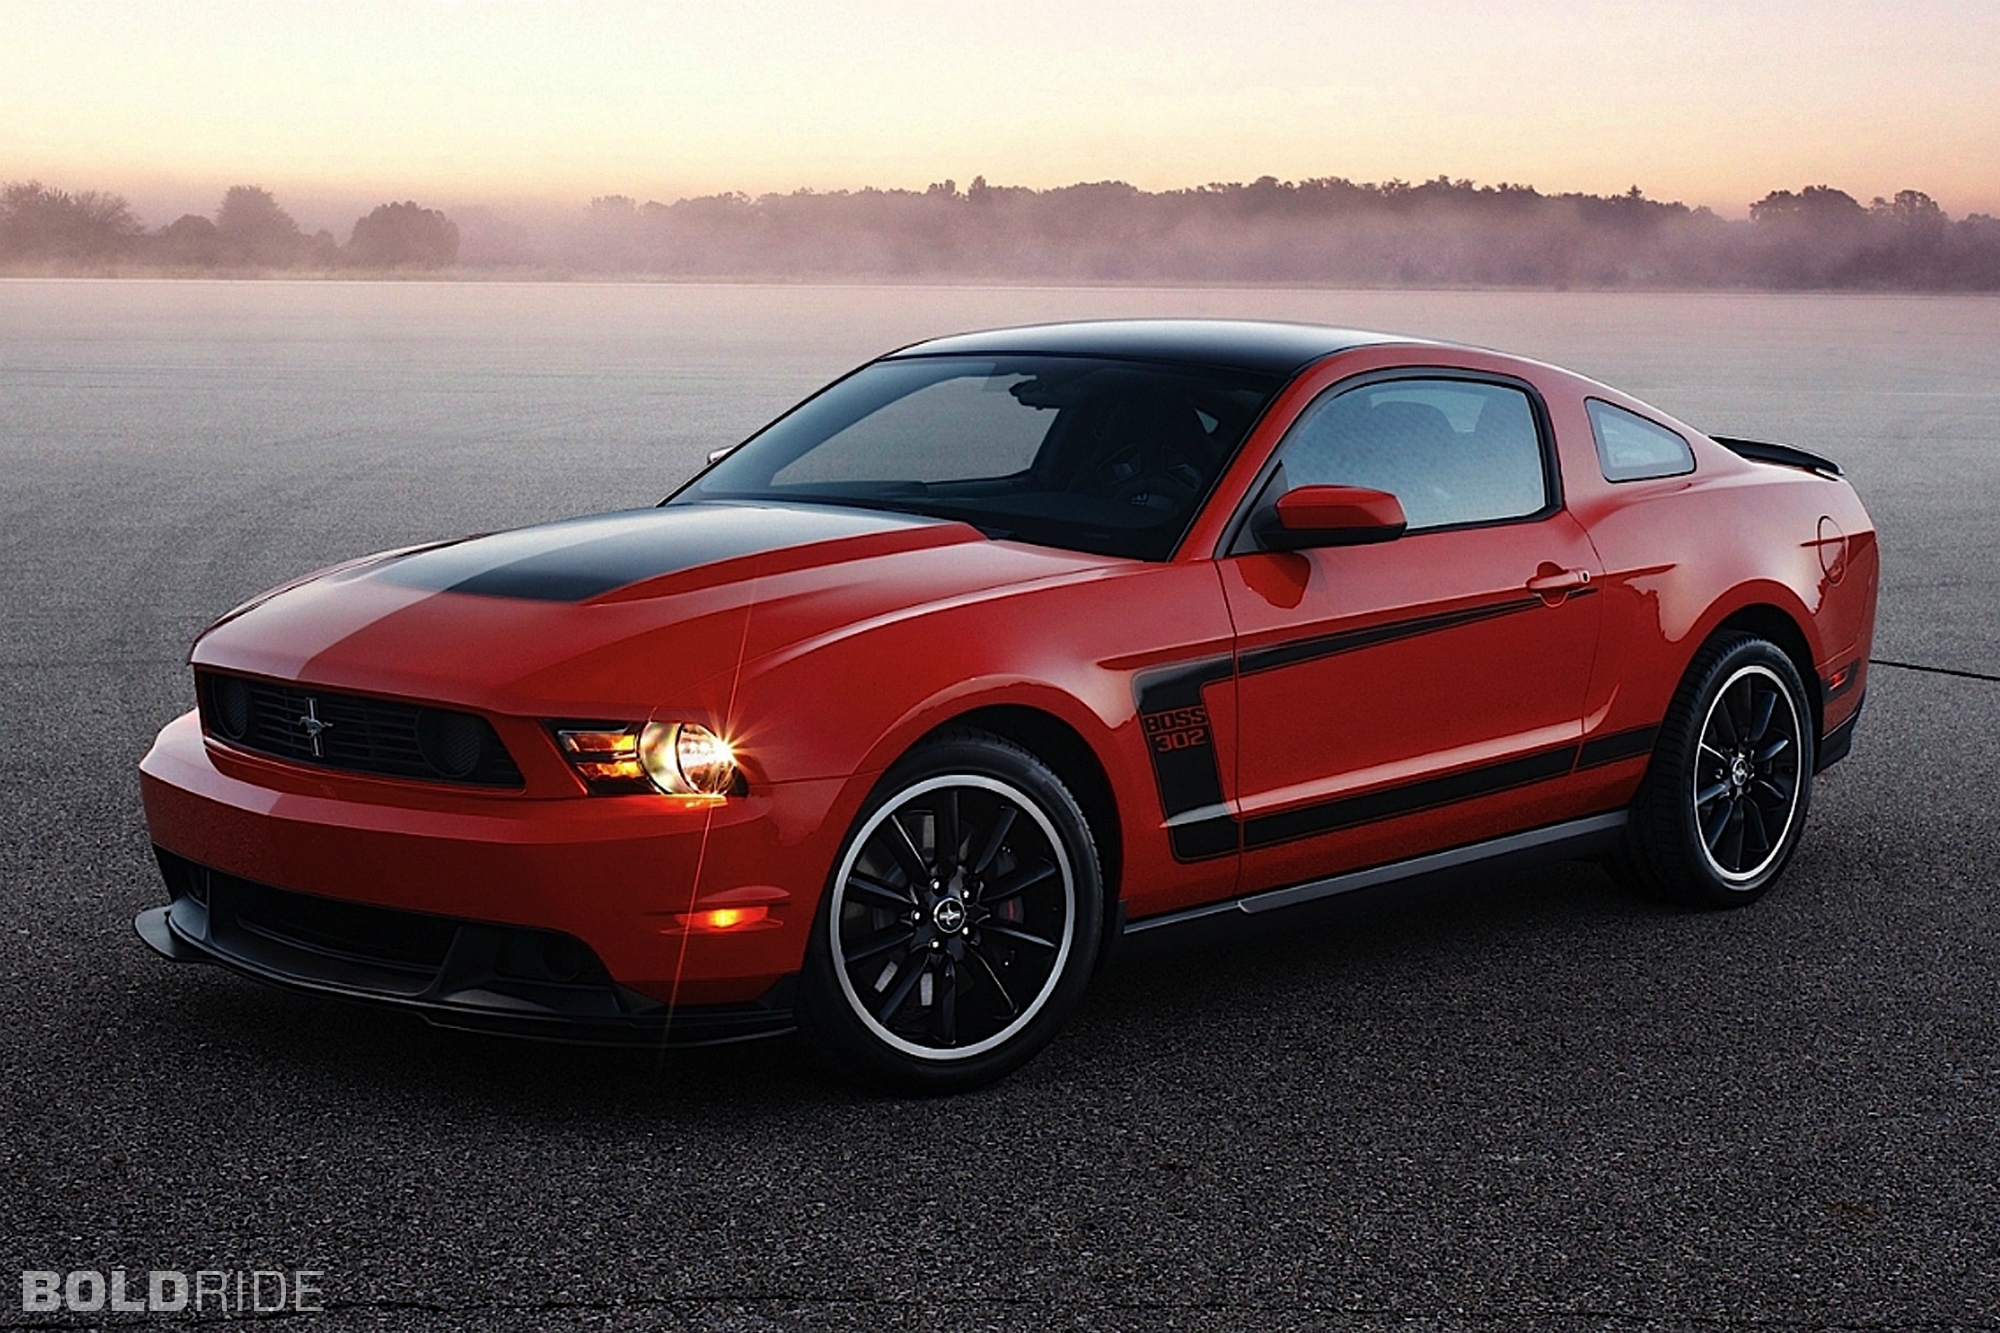 2012 Ford Mustang Boss 302 1600 x 1200